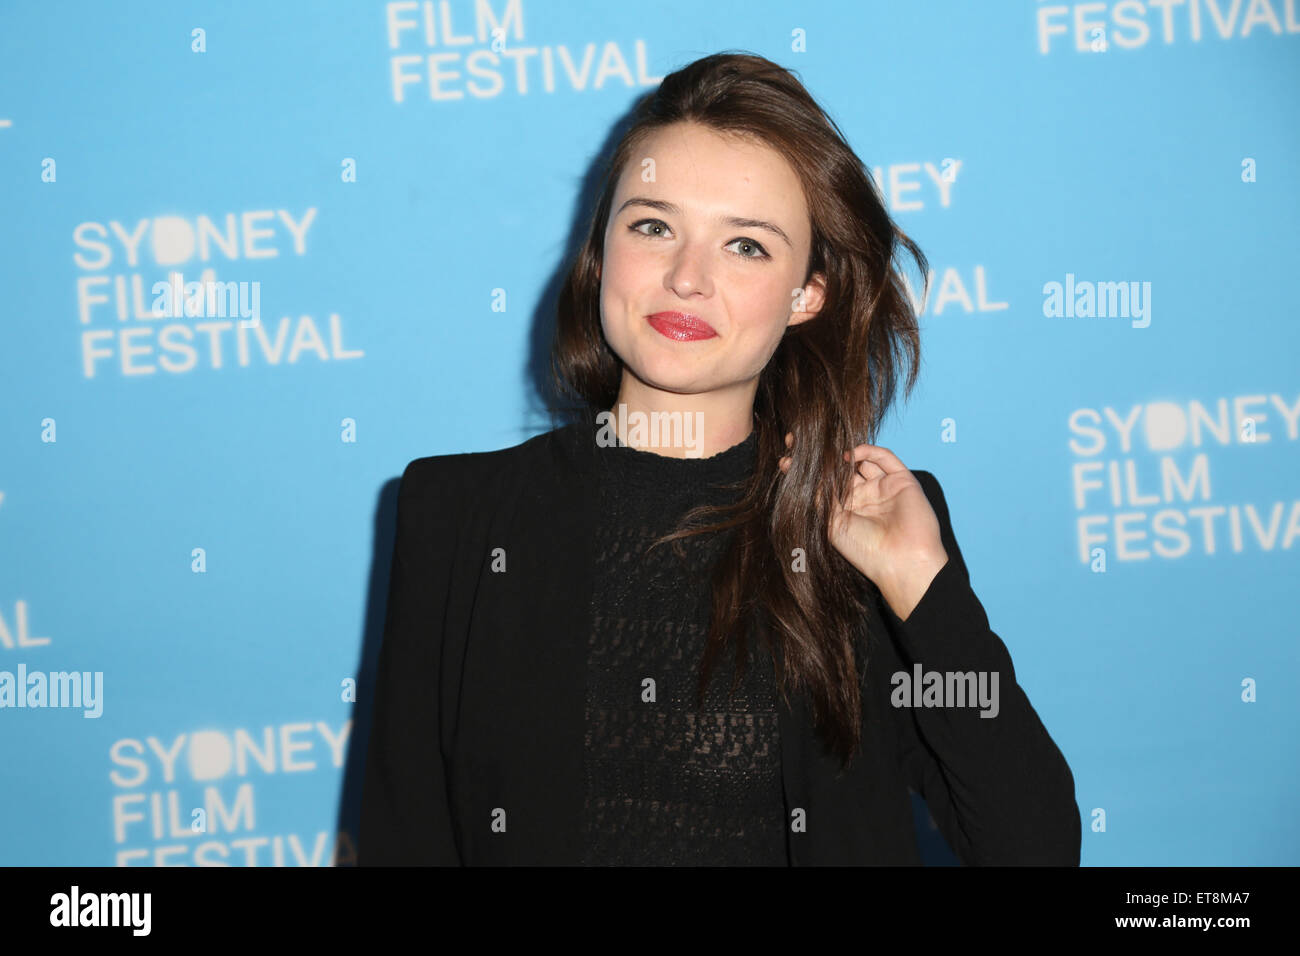 Sydney, Australia. 12 June 2015. Pictured: Actress Philippa Northeast (Home & Away). VIPs arrived on the red carpet for the Sydney Film Festival Australian Premiere of Tangerine at the State Theatre, 49 Market Street, Sydney. Credit: Richard Milnes/Alamy Live News Stock Photo